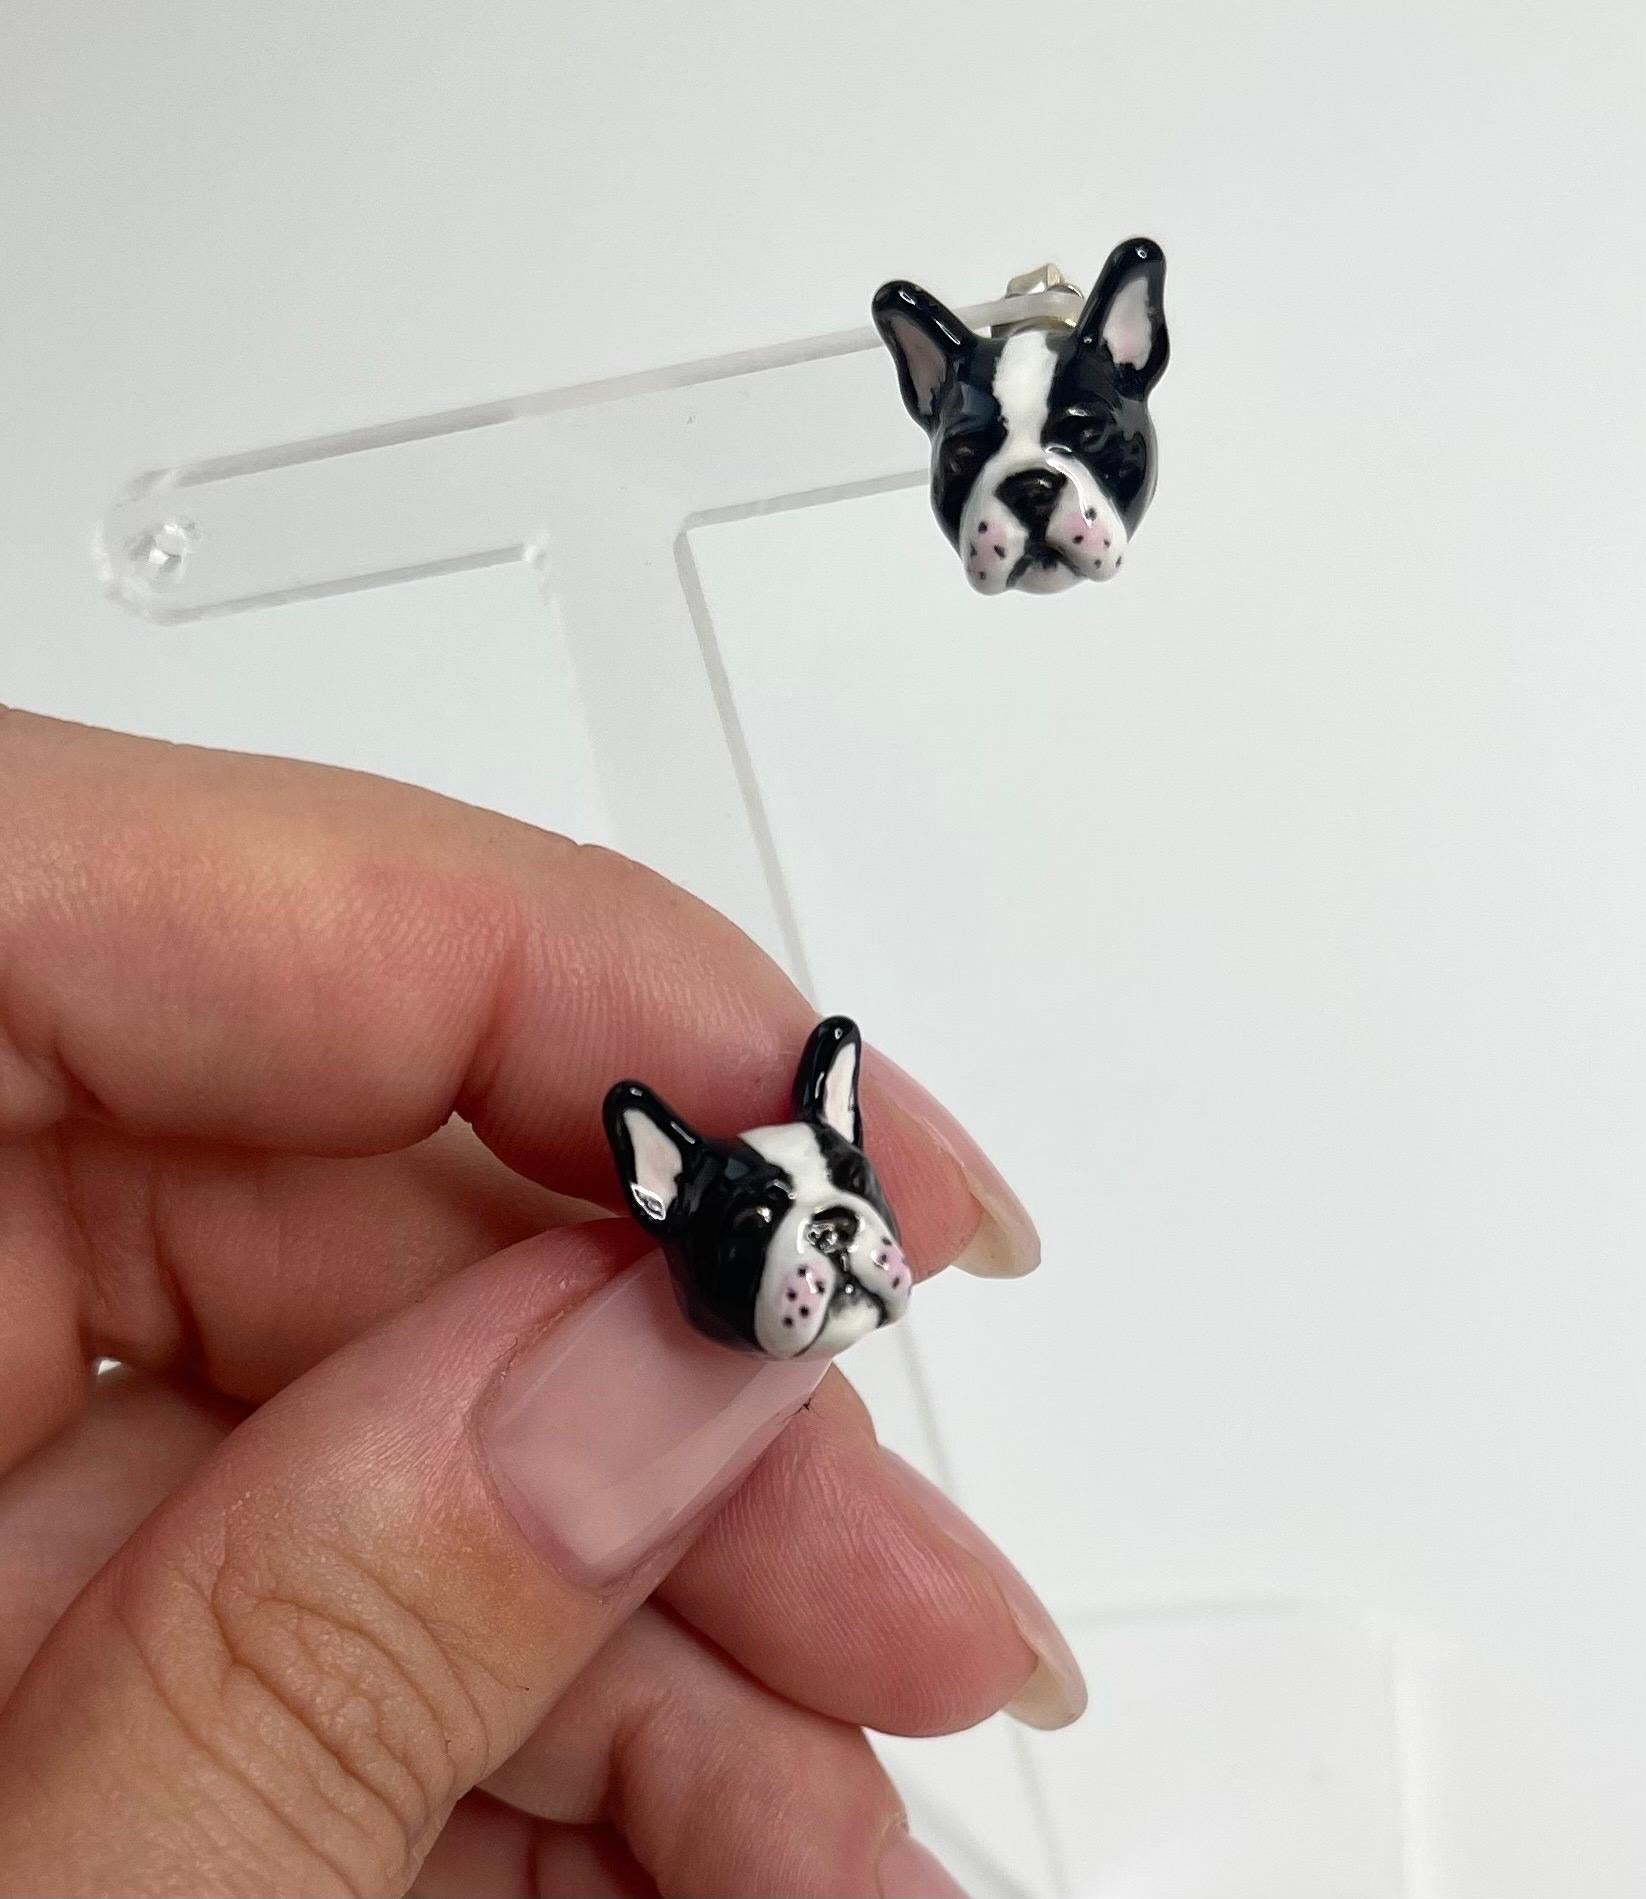 

Earrings made in sterling silver 925, totally hand made and hand painted. 
These earrings feature a French bulldog dog with fur black and white and thanks to amazing hand enamel life-like features is vividly rendered.   

Its possible to depict